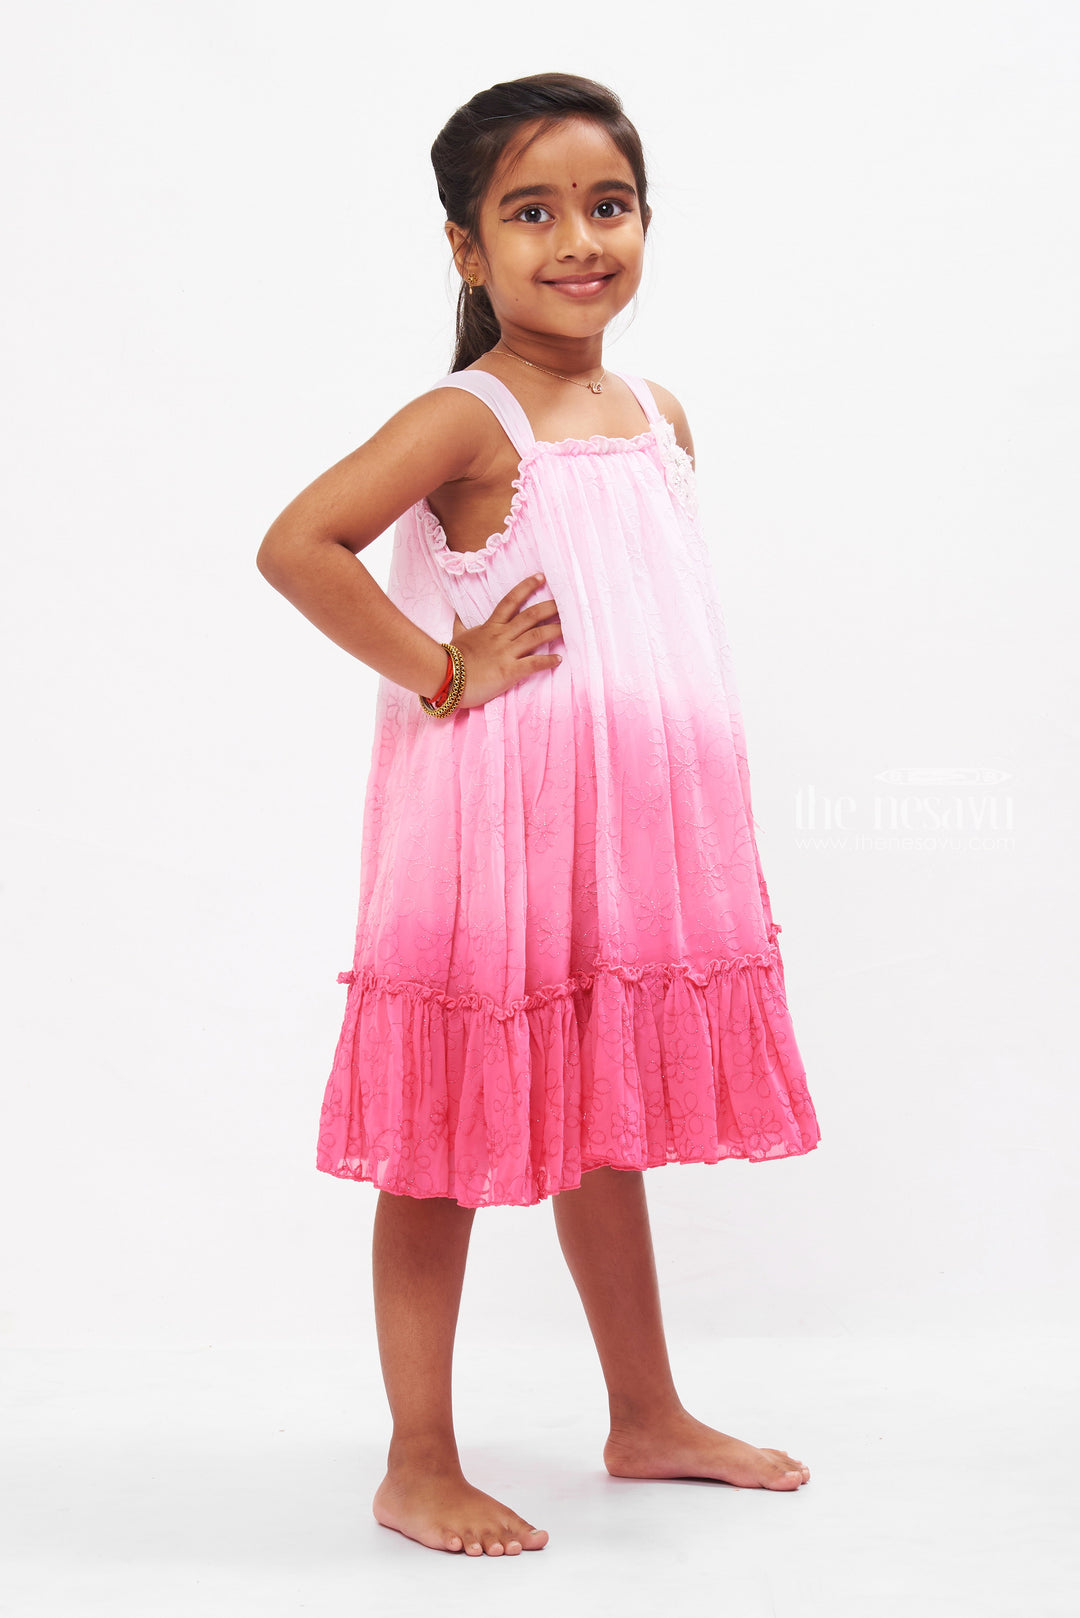 The Nesavu Girls Fancy Frock Girls Pink Princess Frock with Sparkling Tulle - Enchanted Evening Wear Nesavu Girls Pink Party Frock | Sparkly Tulle Dress for Kids | The Nesavu